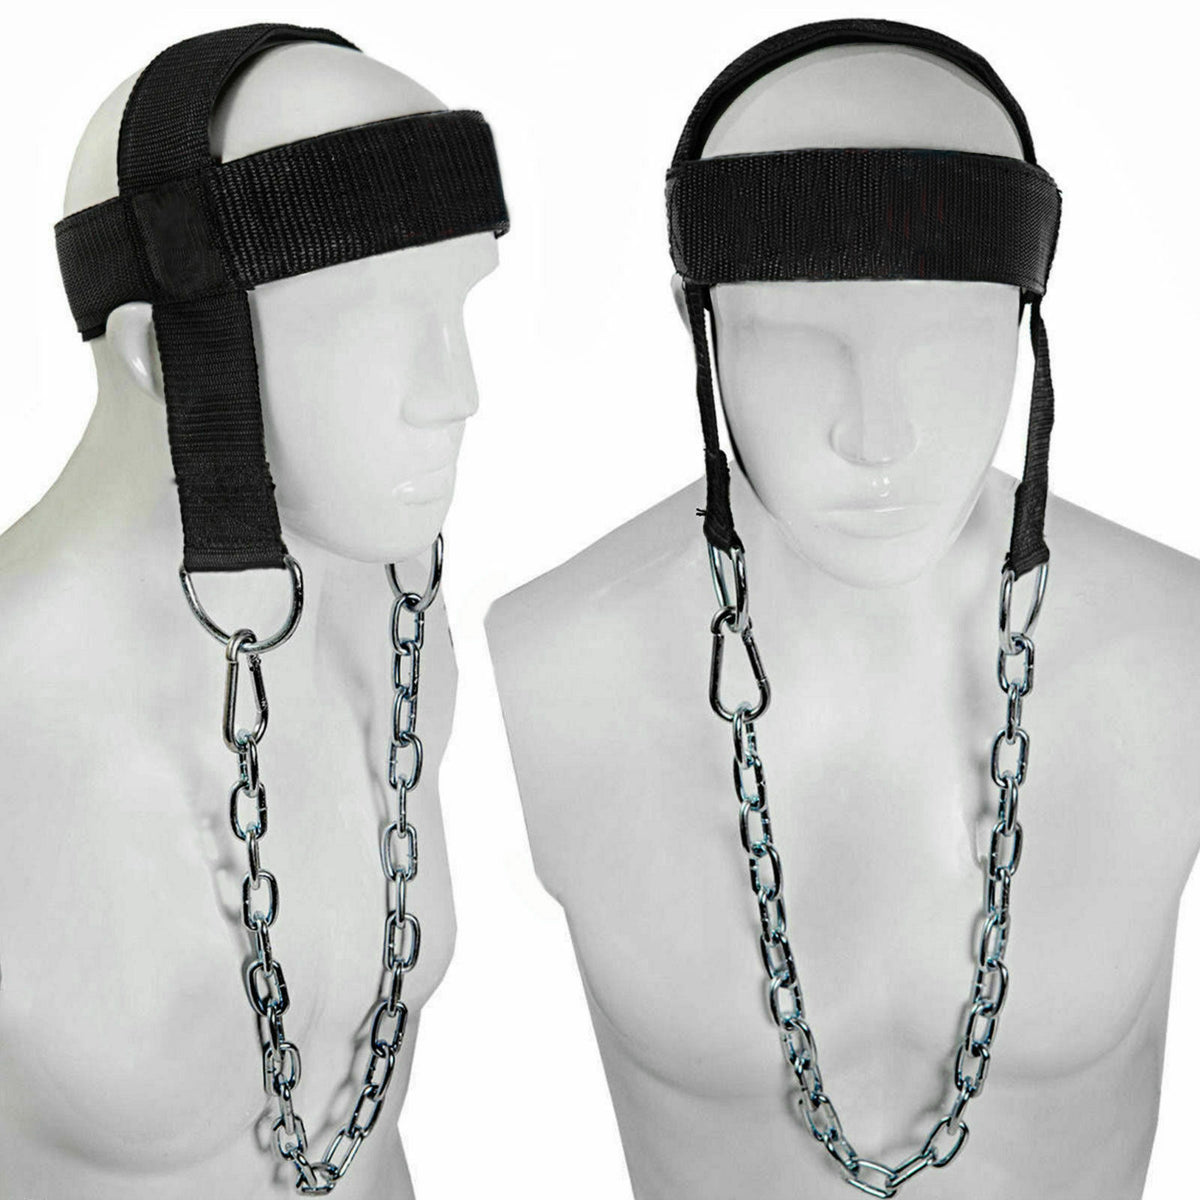 Neck Exercise Harness